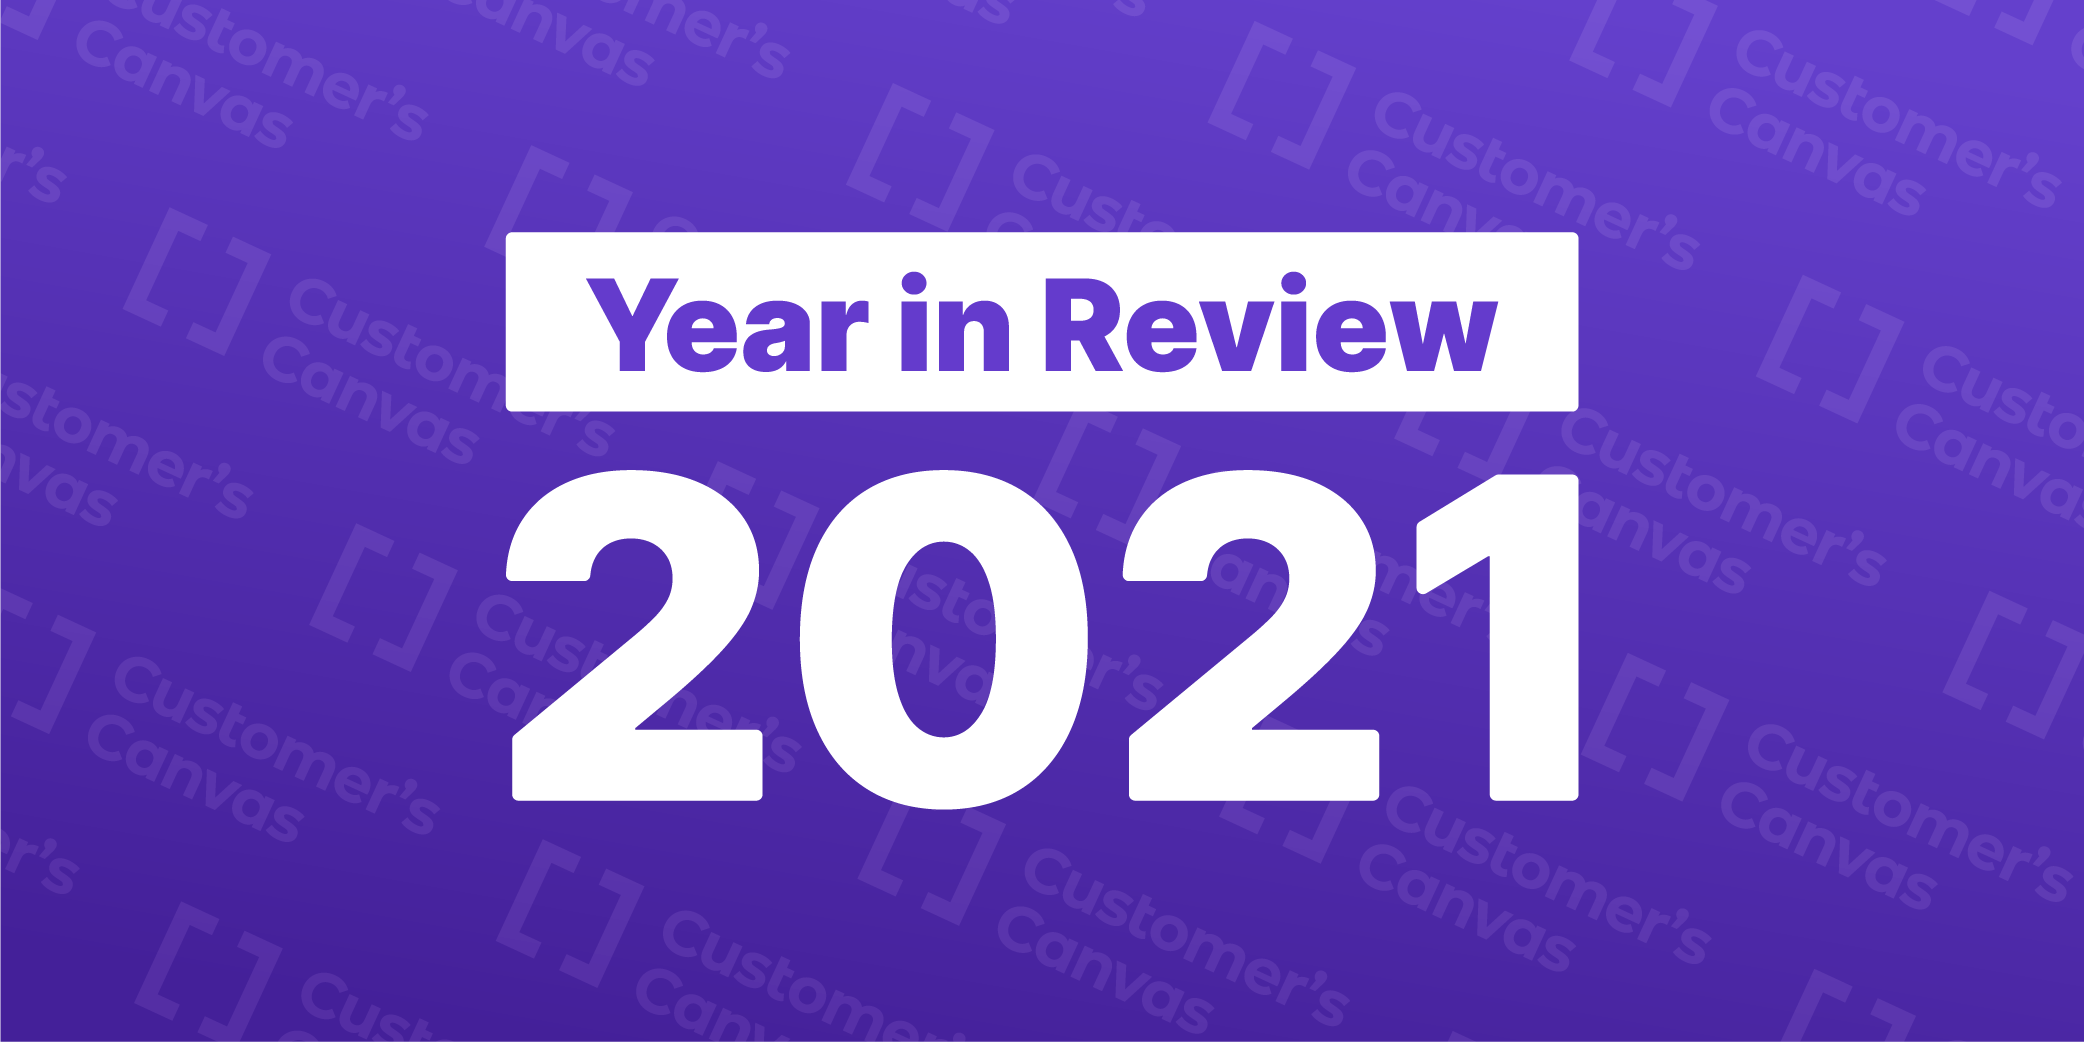 Year in Review: 2021 